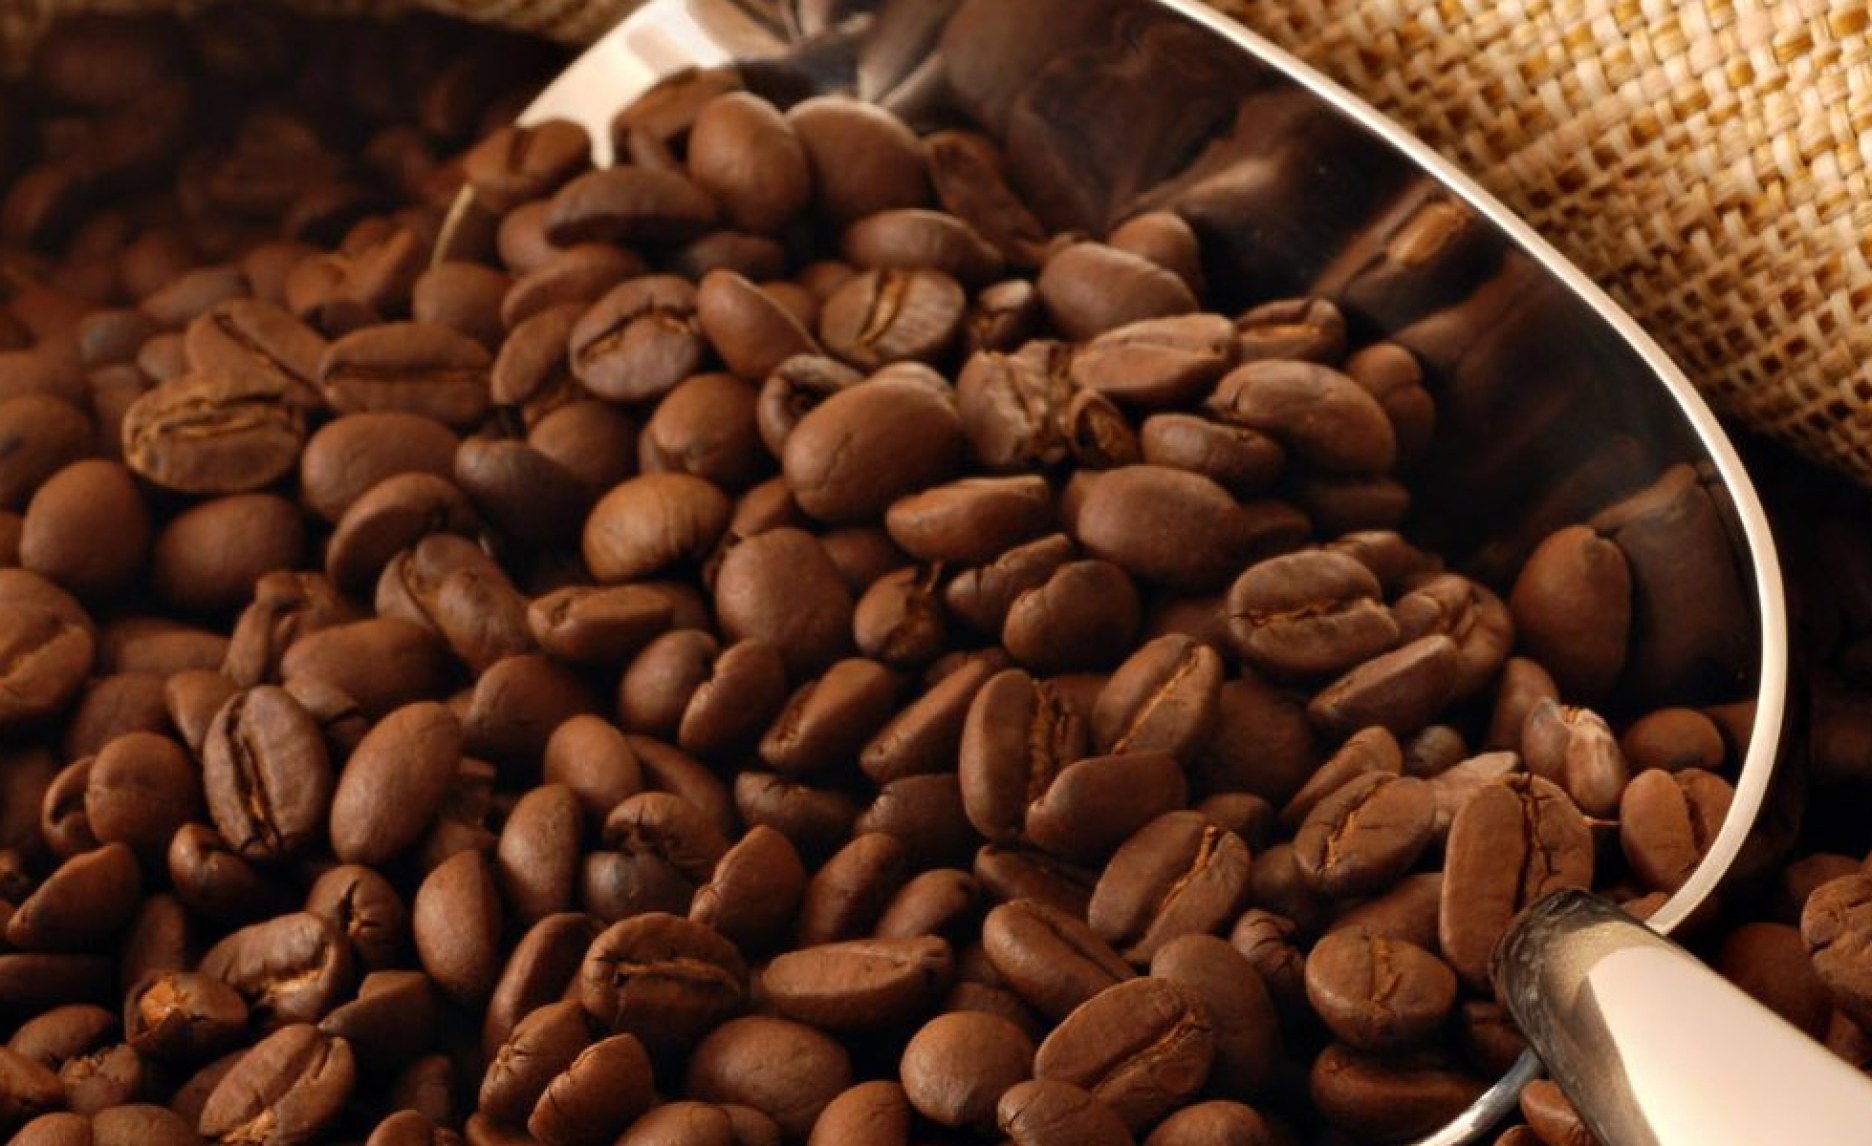 Ethiopia to Dominate Global Coffee Market Soon, Says Expert - allAfrica.com